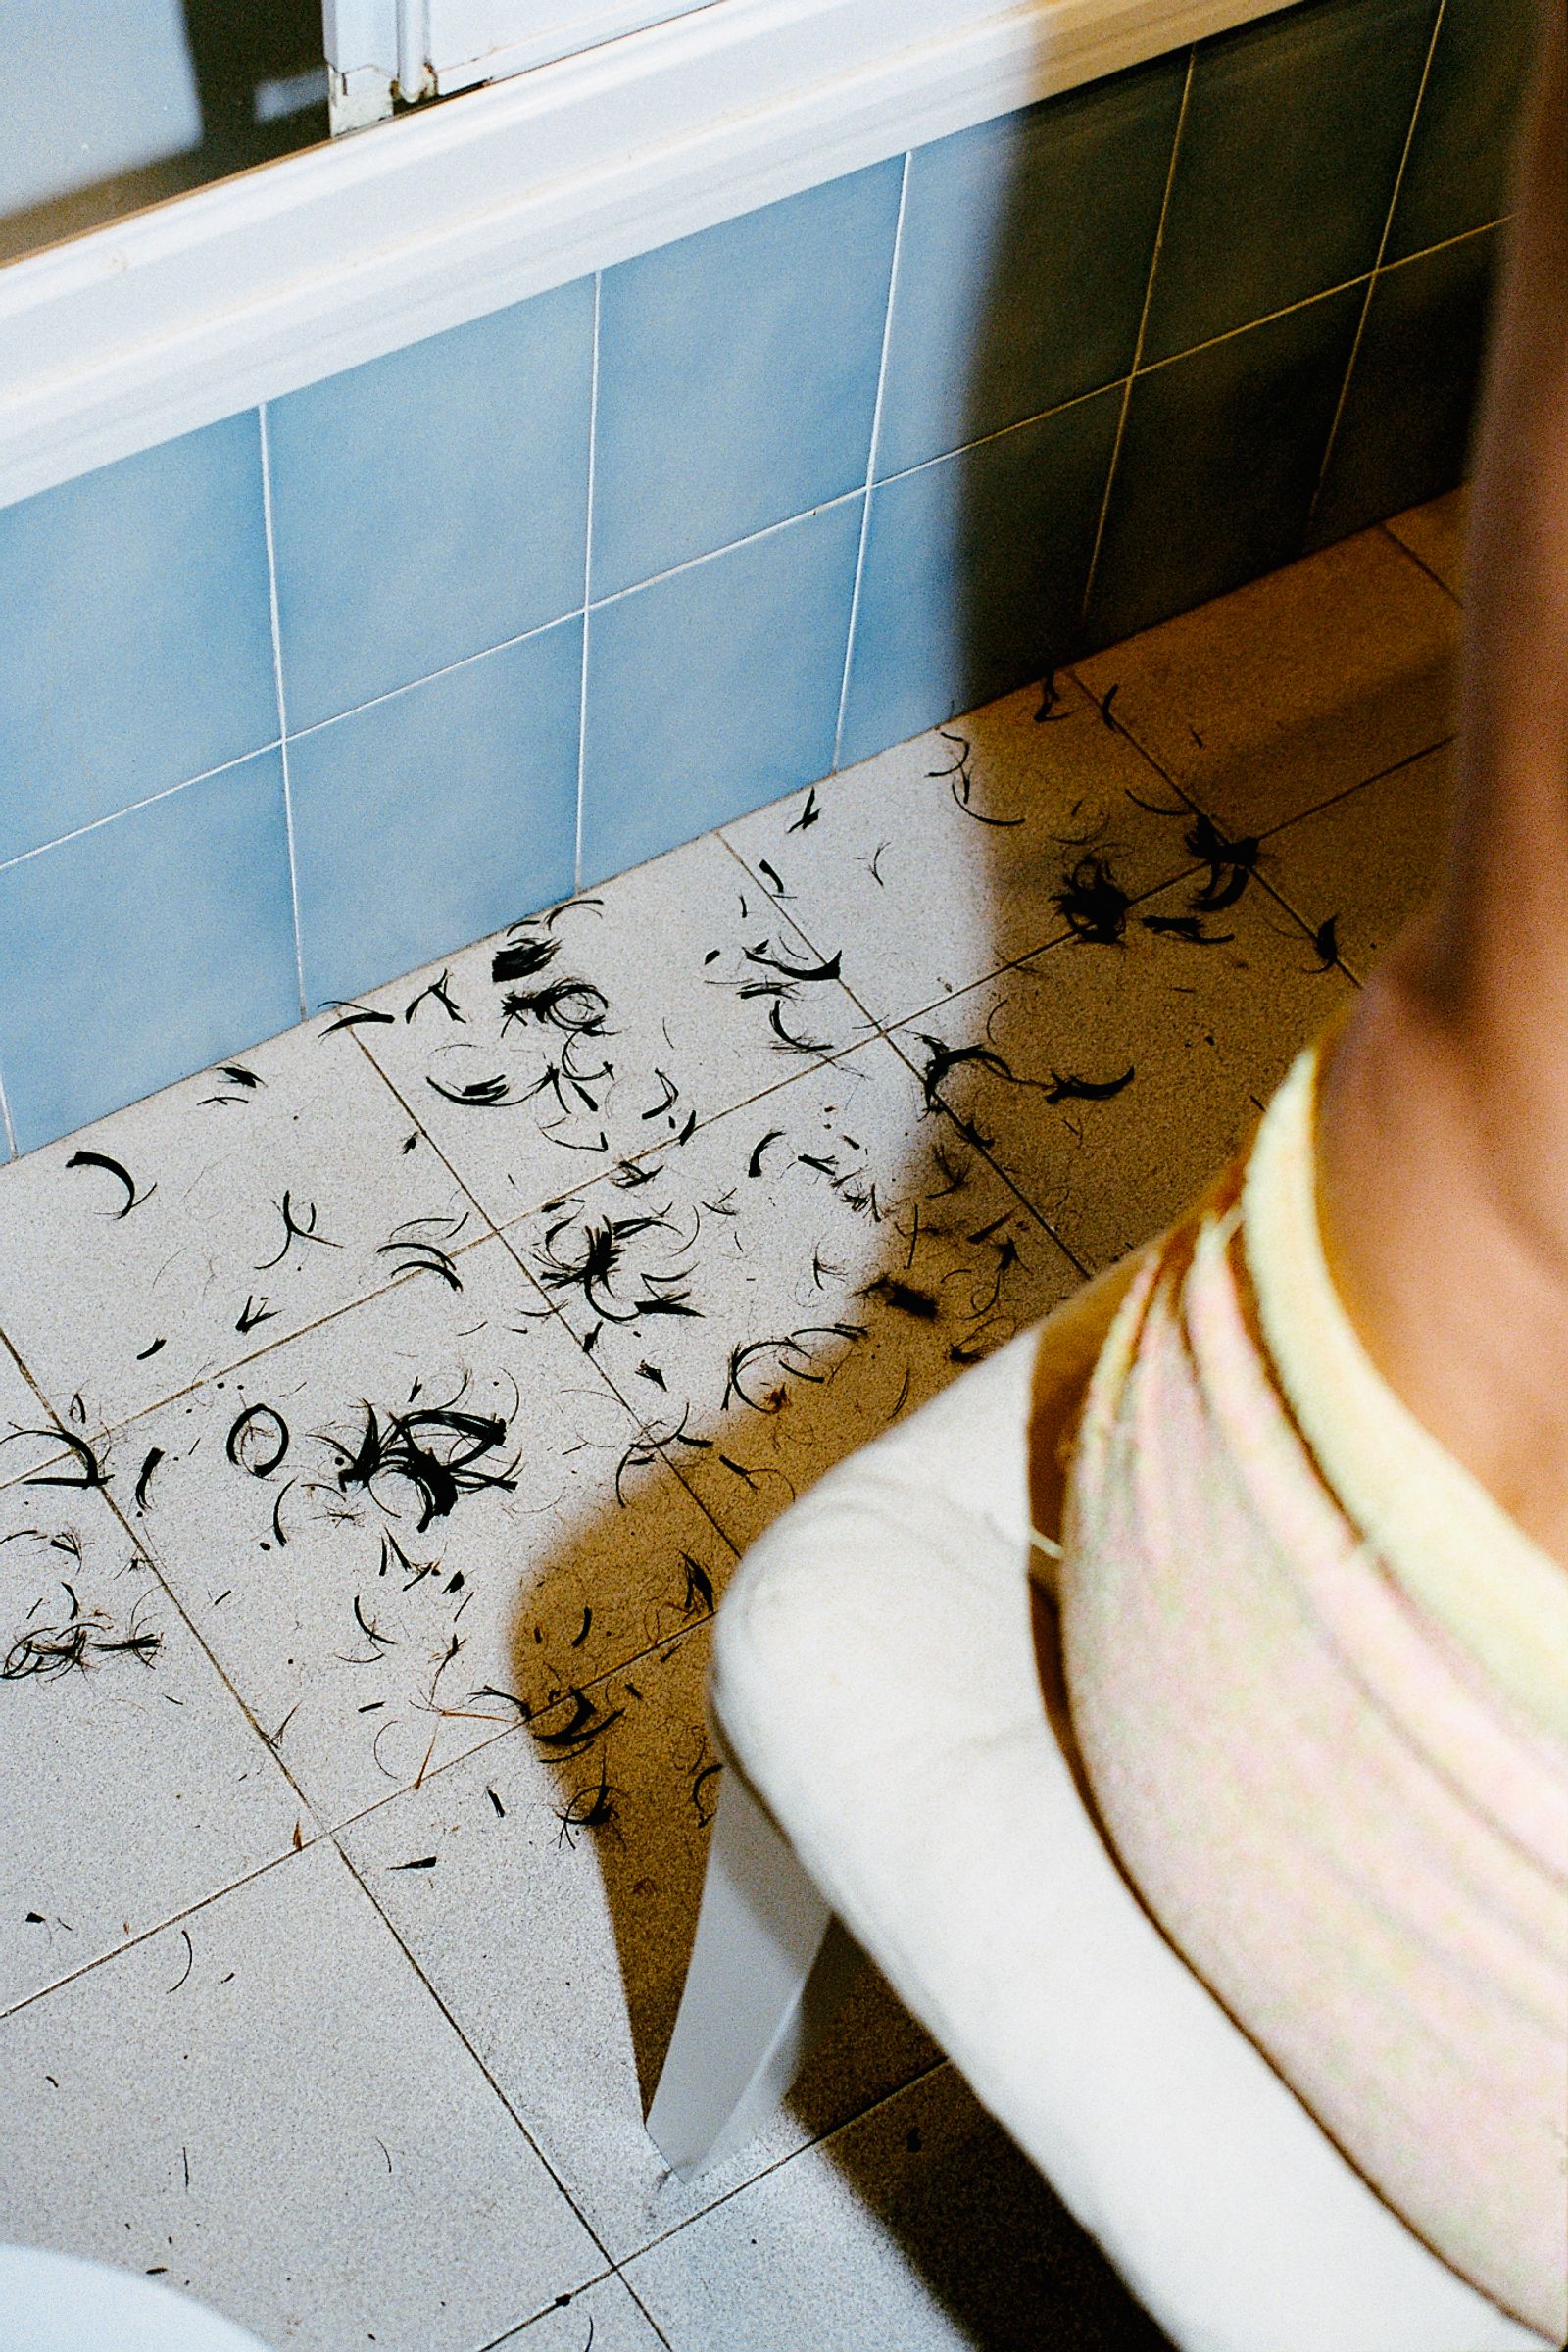 © Mercedes Cosco - Image from the How to live with the things I can't control photography project